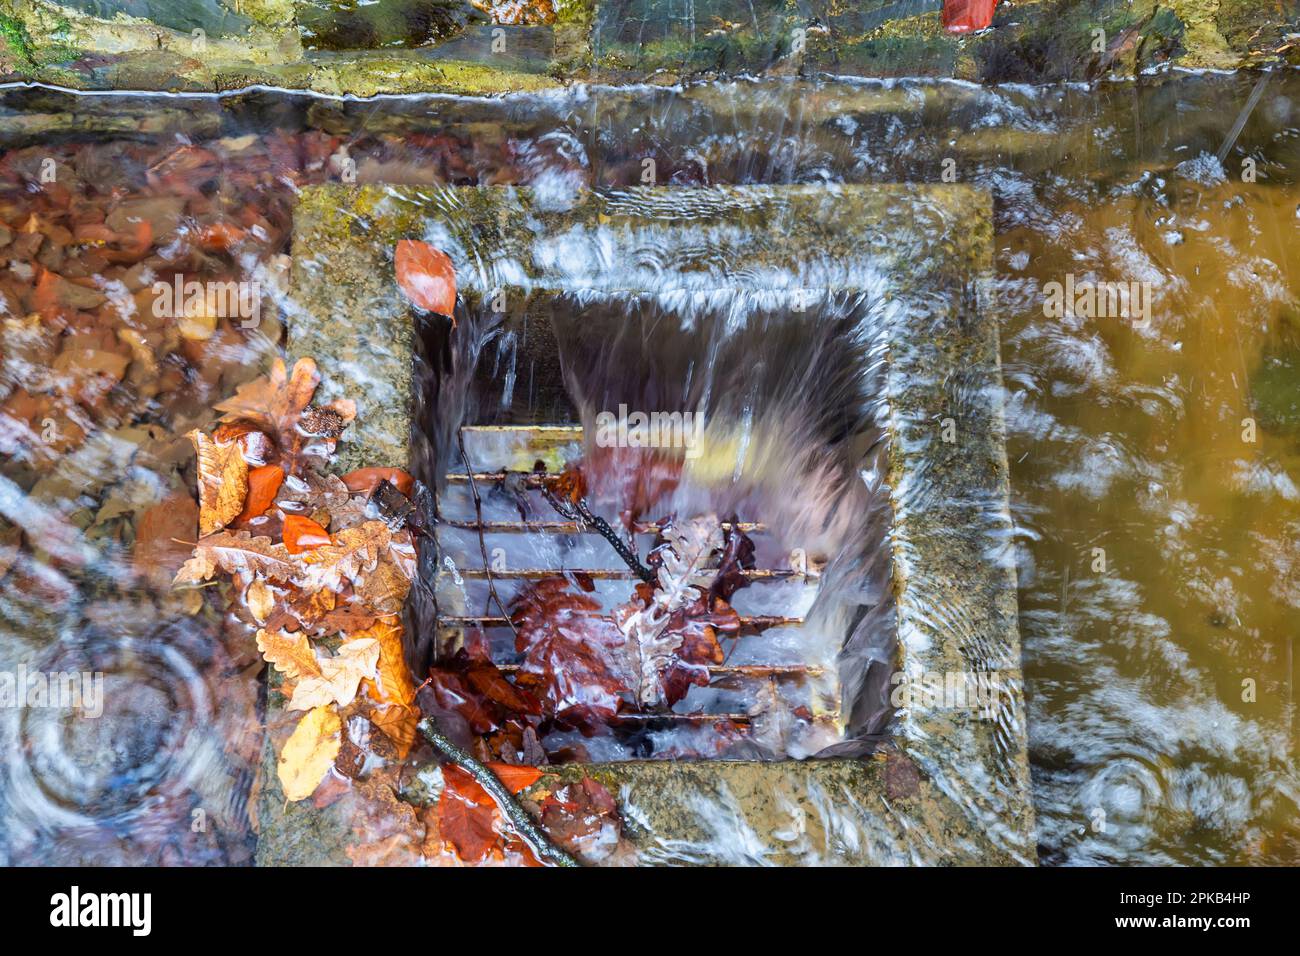 Dried Leafs blocking drains and flooding in autumn. Stock Photo